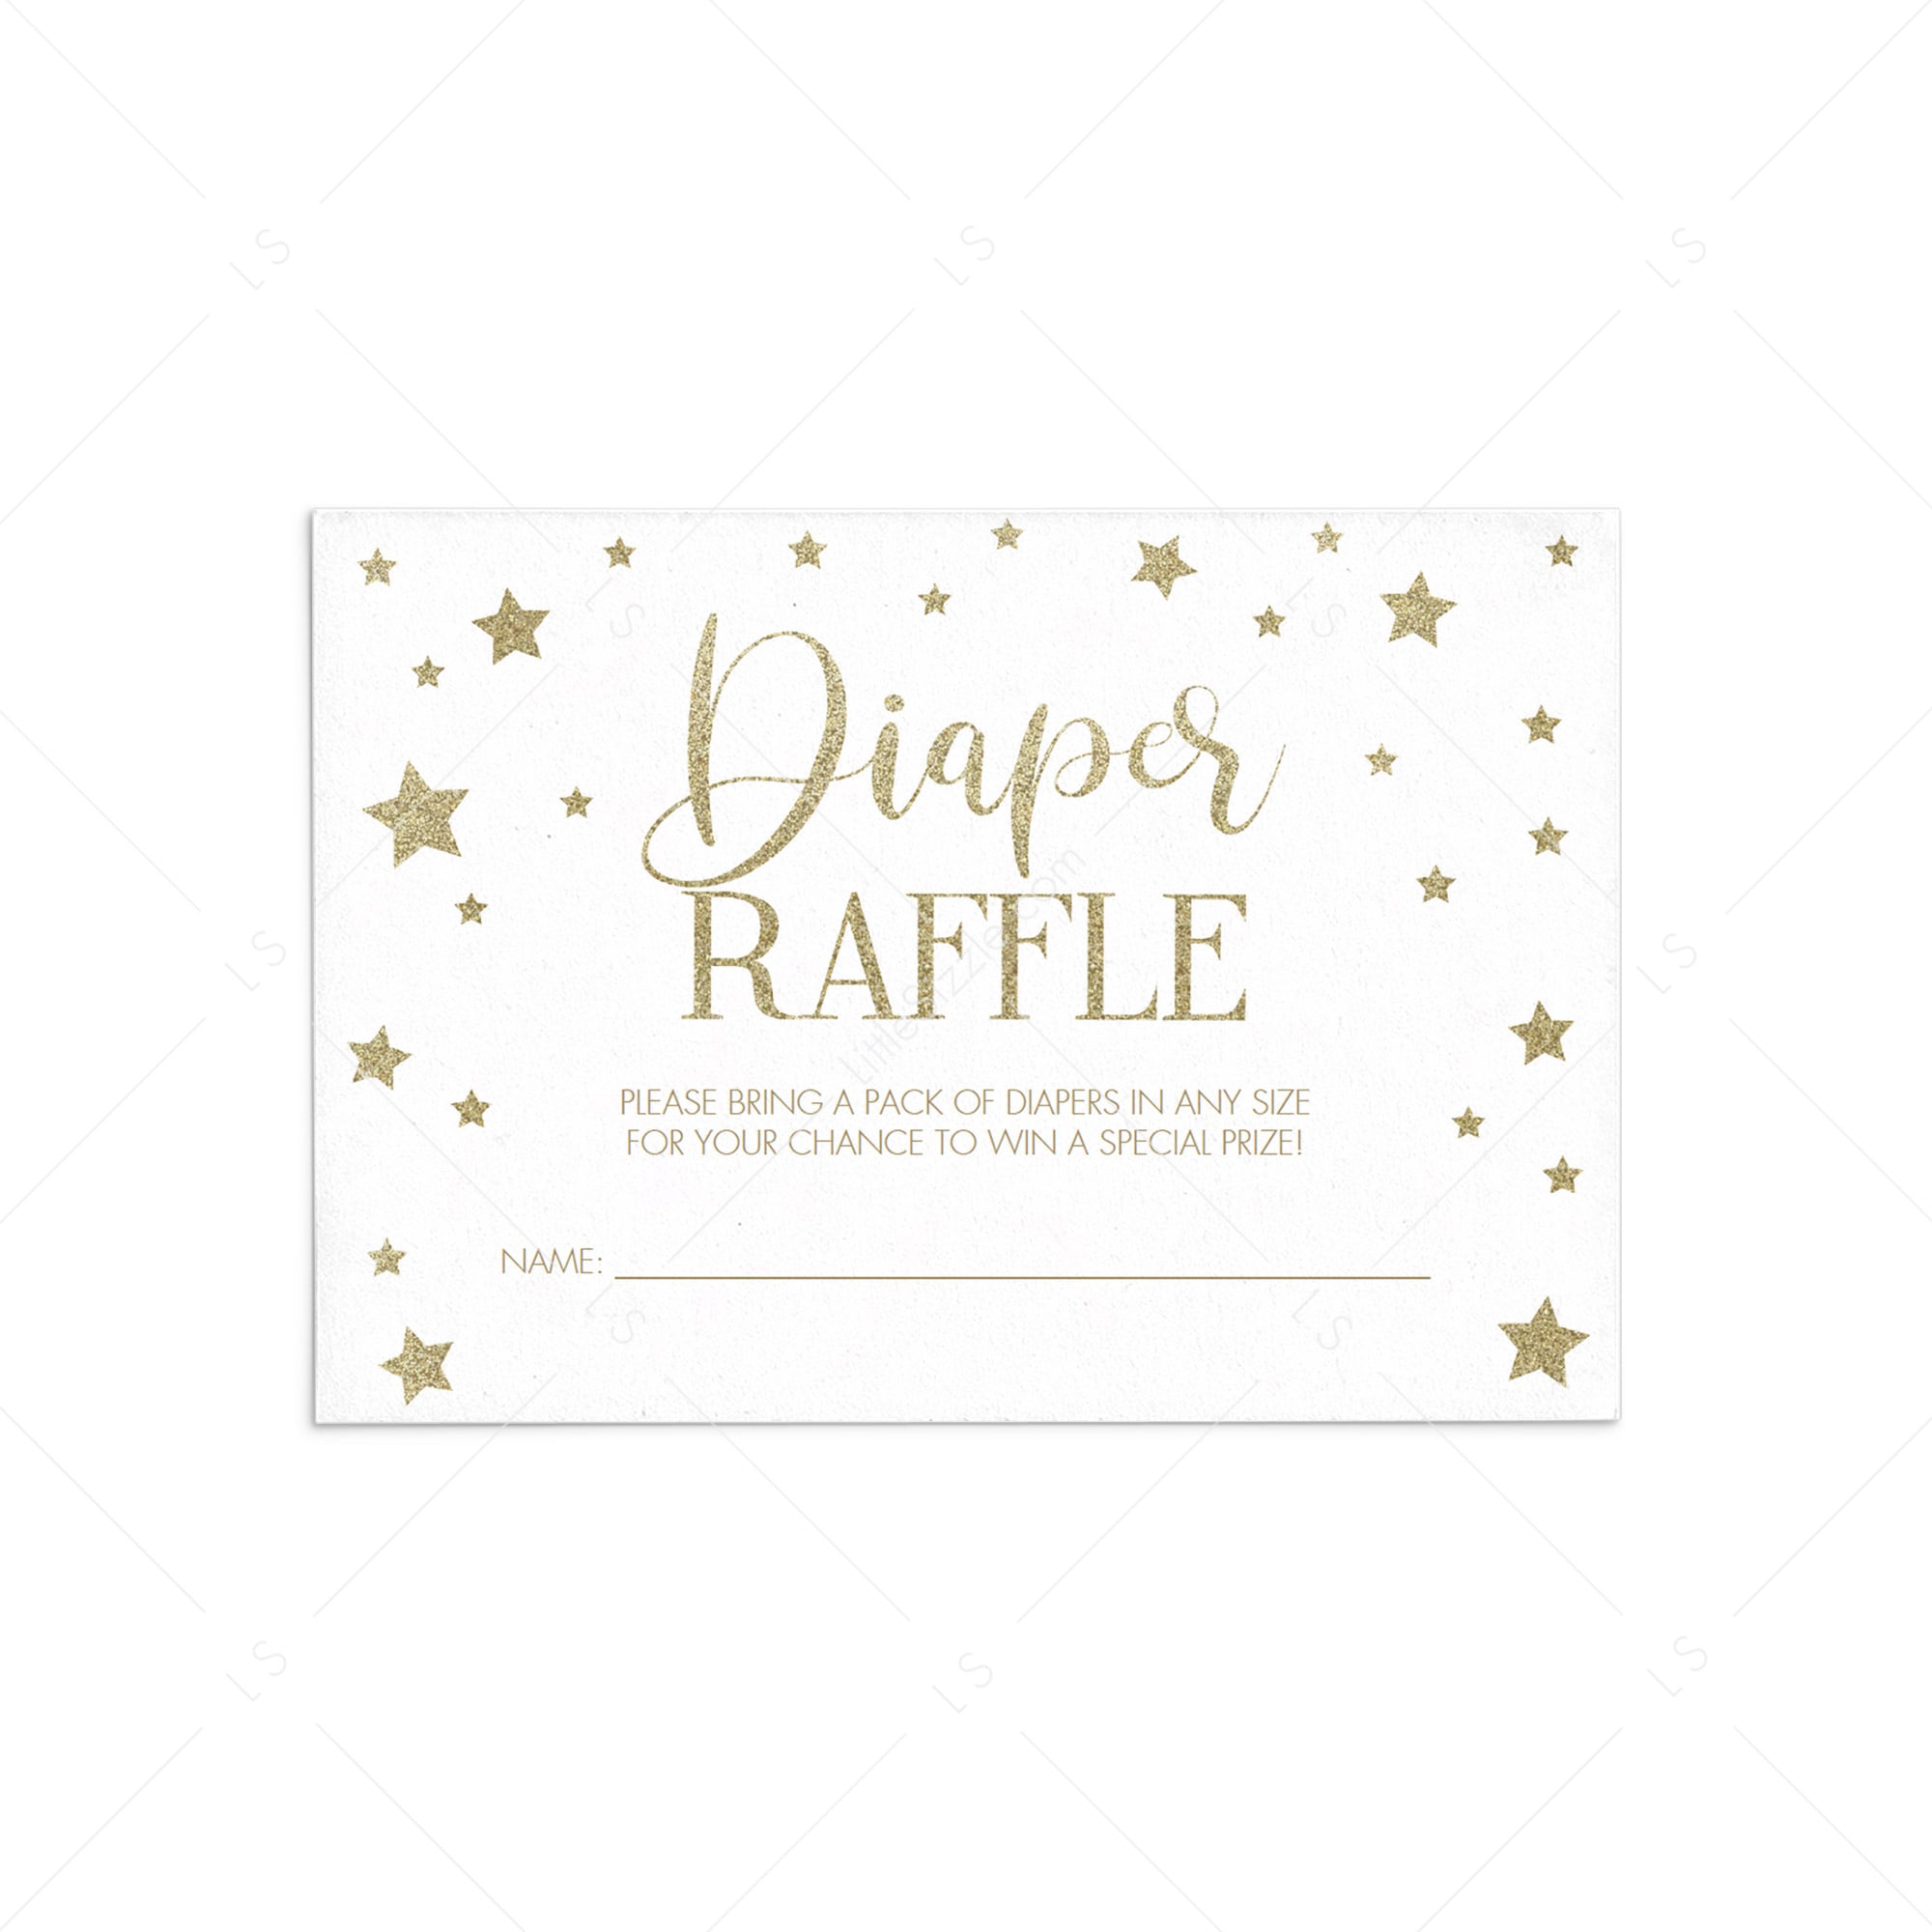 Diaper raffle cards with gold stars printable by LittleSizzle